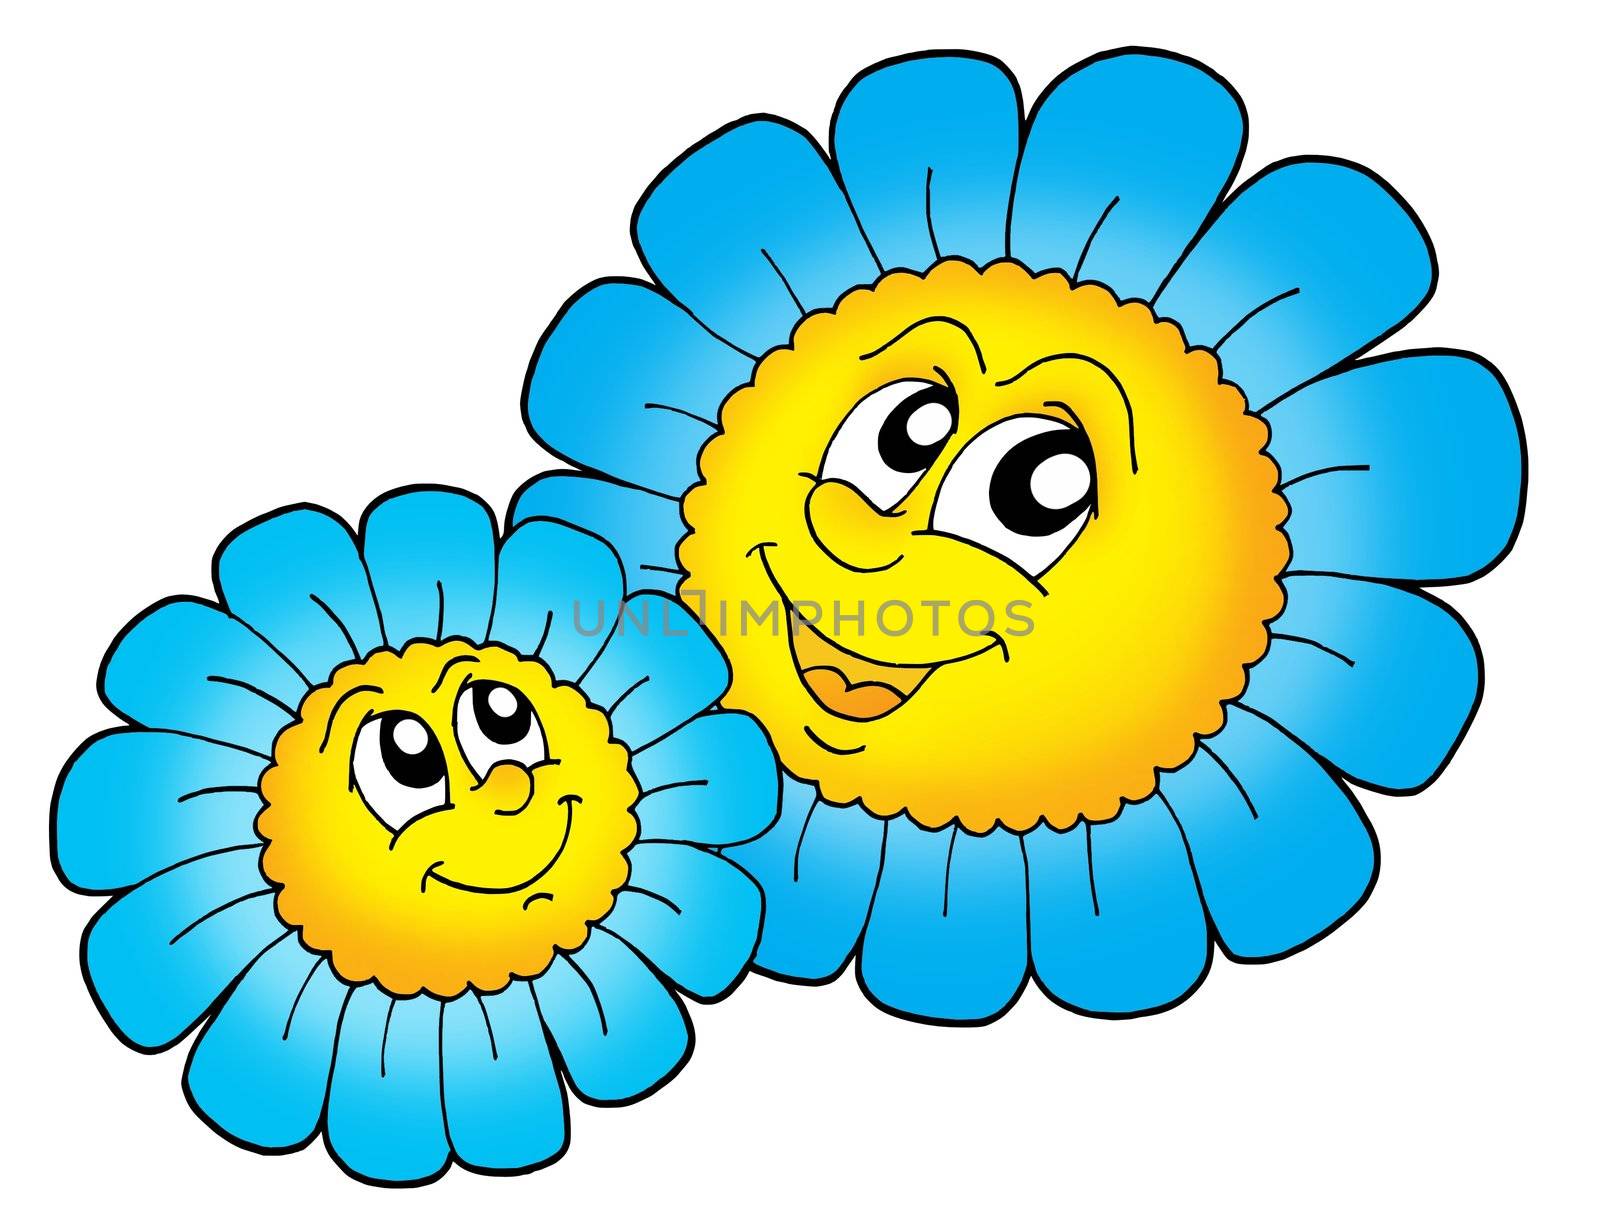 Pair of smiling blue flowers - color illustration.